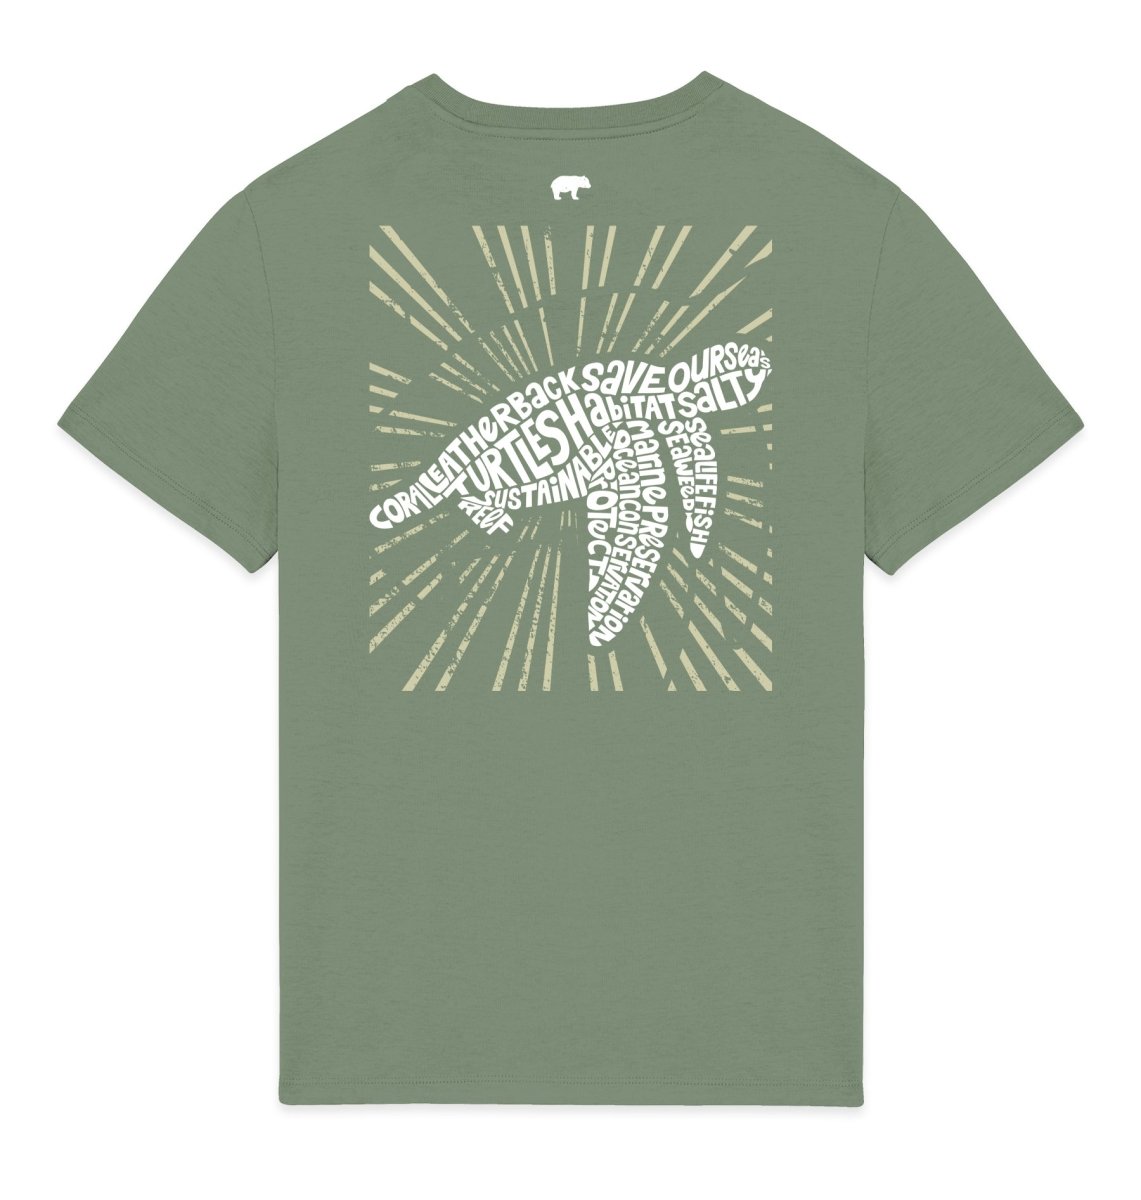 Turtle T-Shirt - Mens Save The Turtles Tee - Wildlife Clothing That Supports Marine Conservation, M / Moss